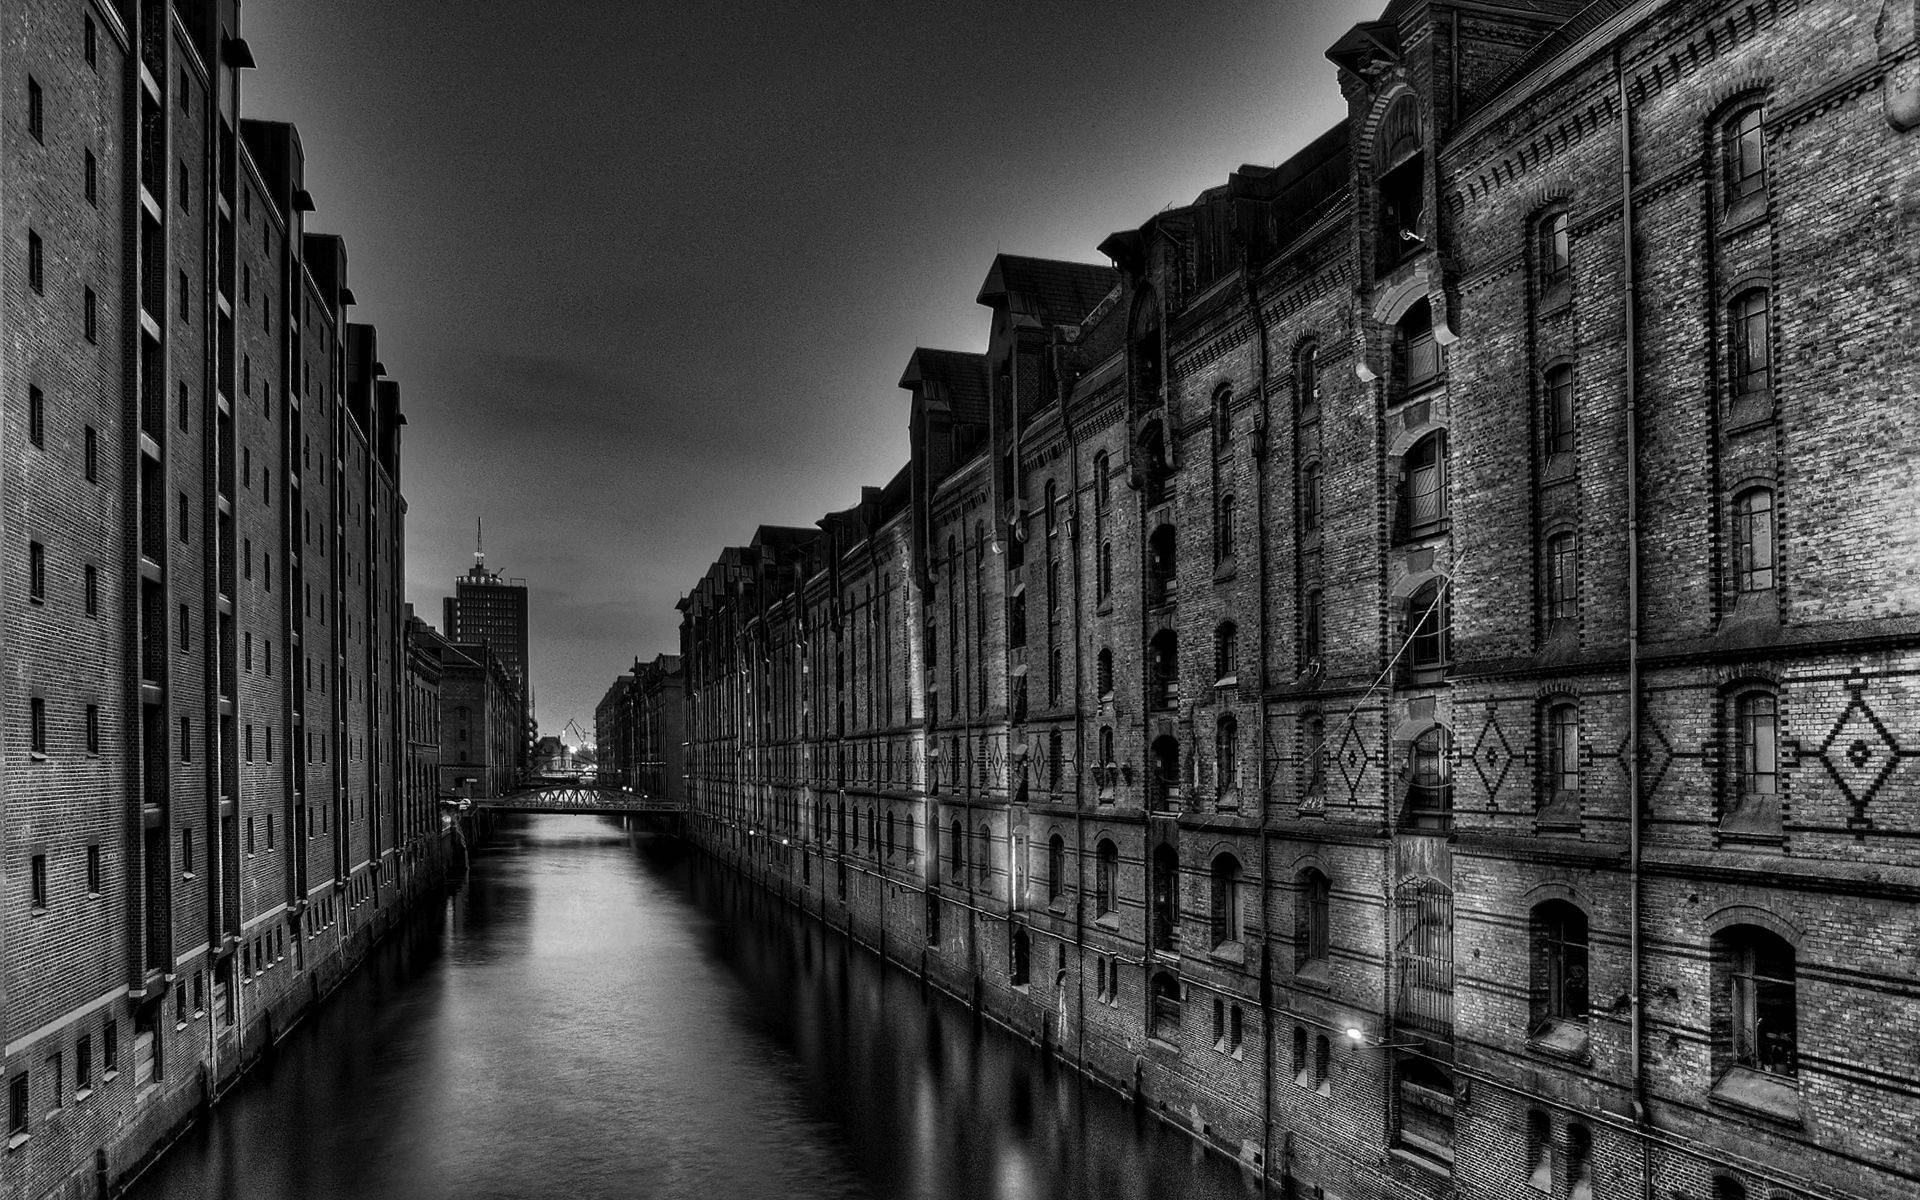 Awesome wallpaper of black and white tall scary buildings surrounding a river. 